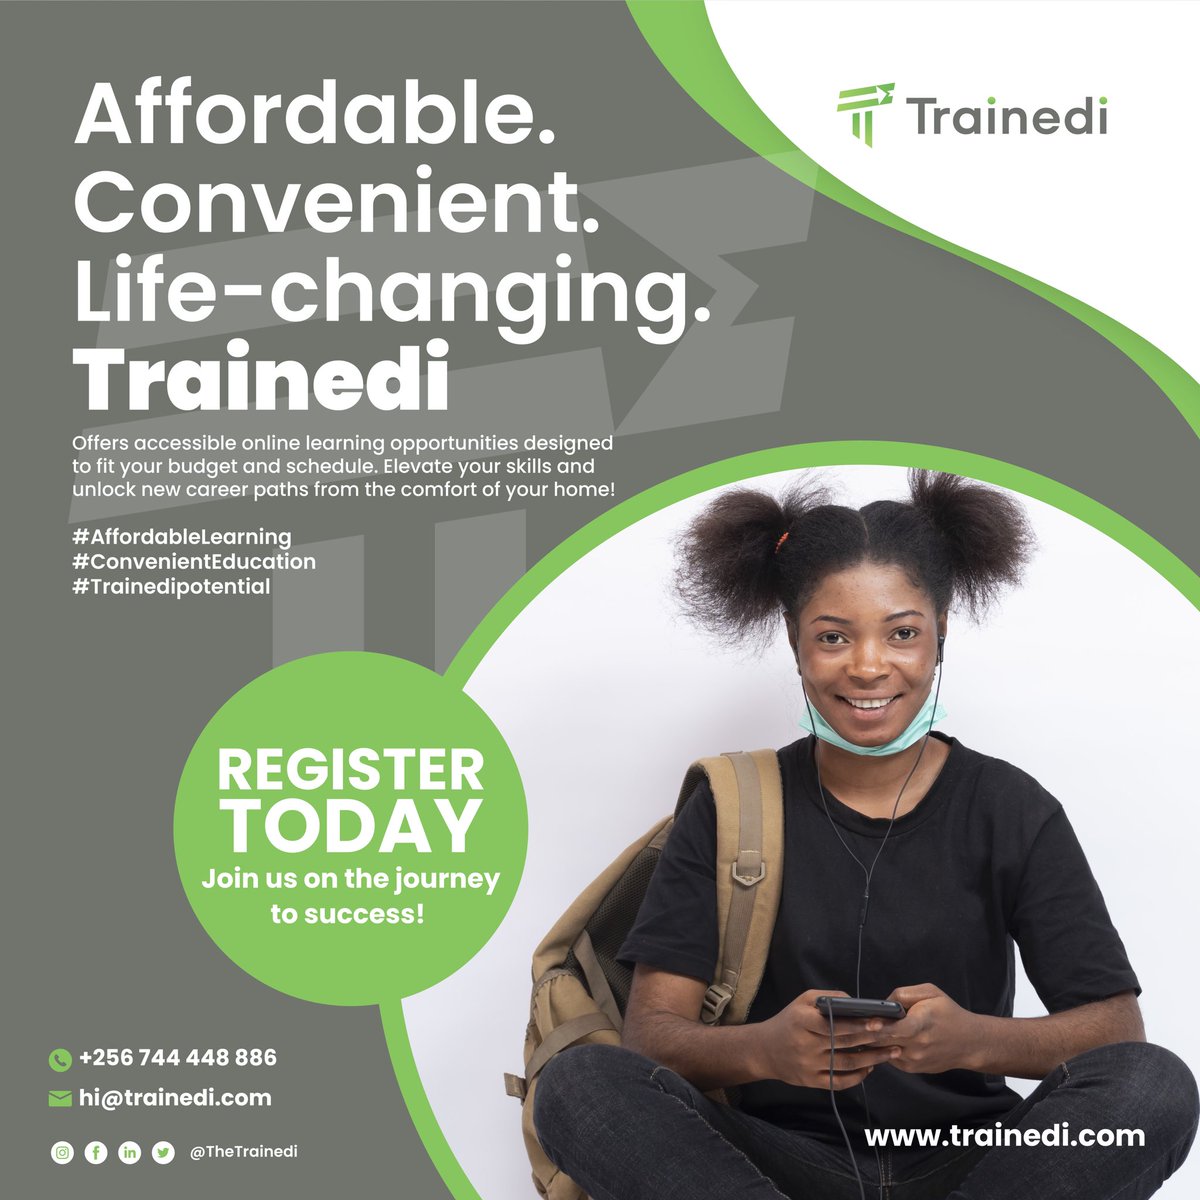 We currently have a free course on @TheTrainedi E-learning shop. You wanna check it out?? You can start learning today and enhance your employable skills Register for free here: trainedi.com/register/